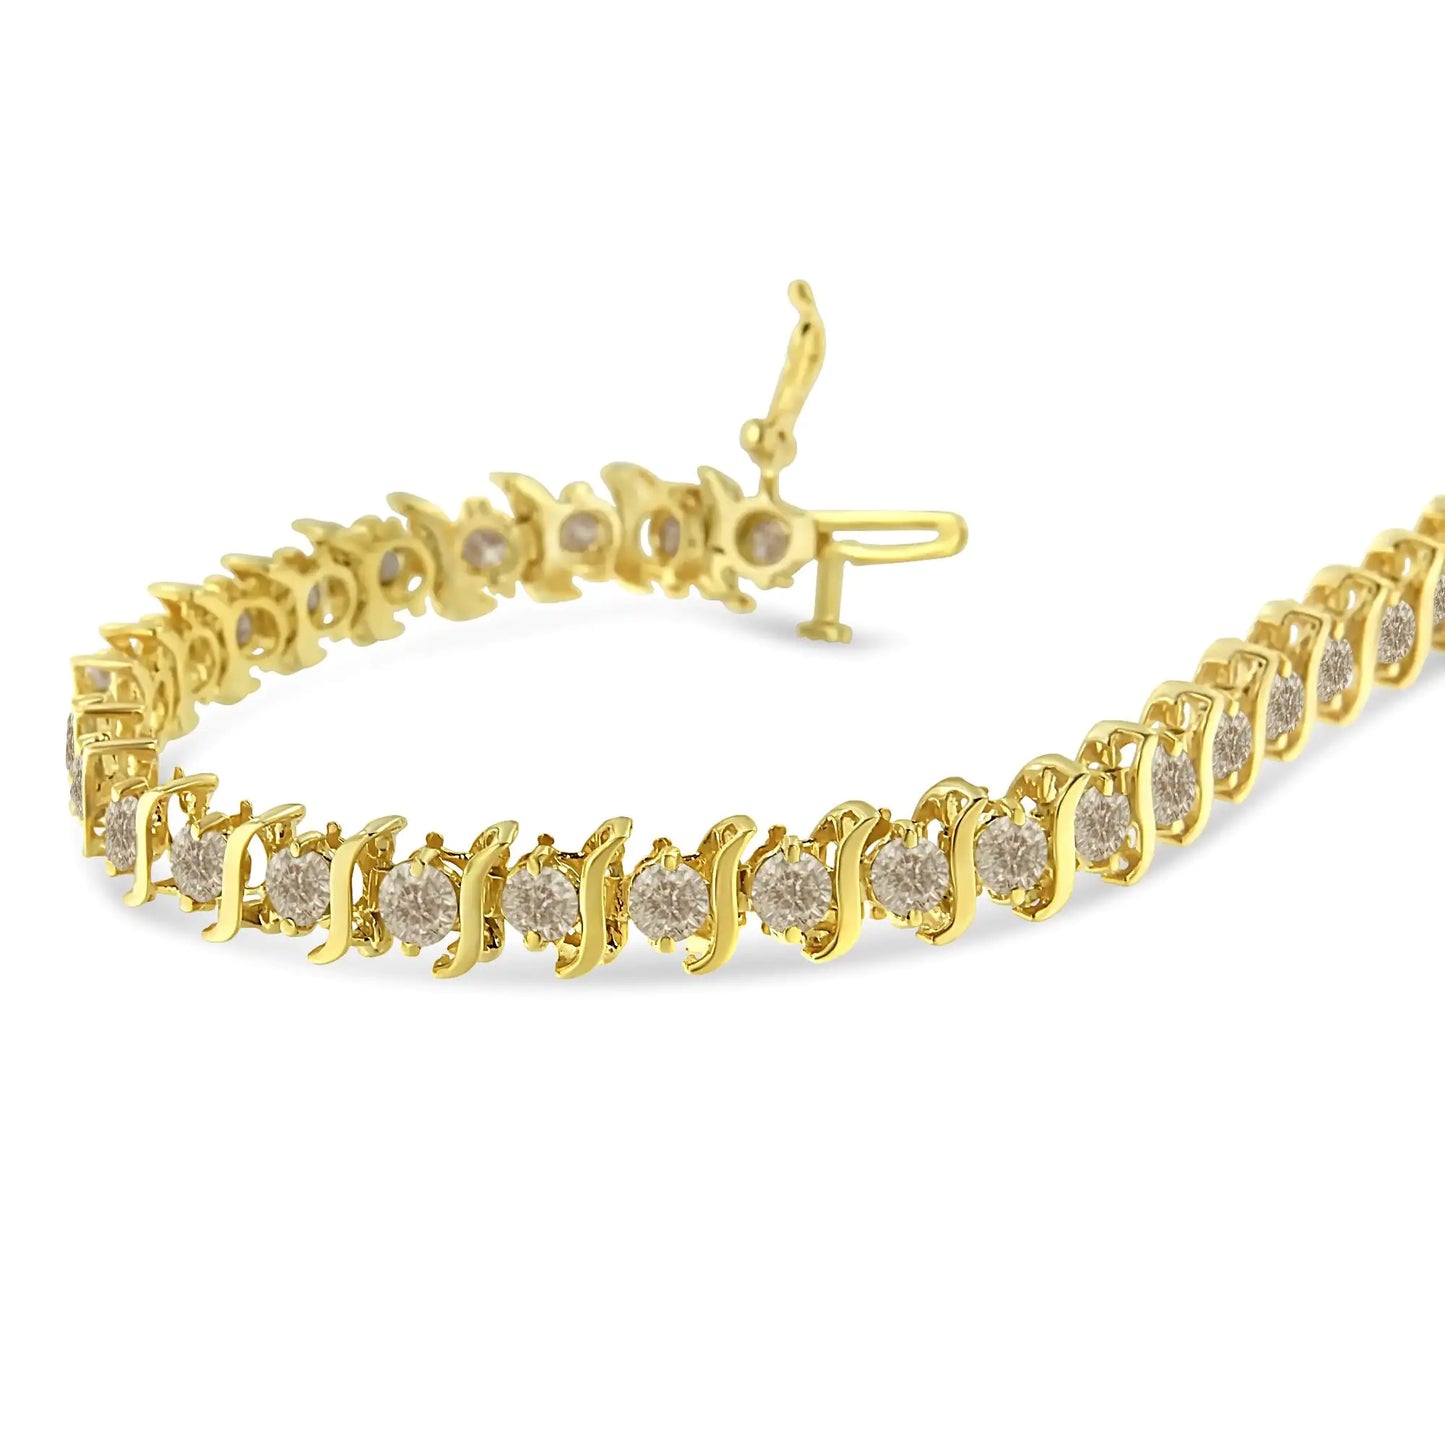 14K Yellow Gold-Plated .925 Sterling Silver 6.0 cttw Classic Round-Cut Diamond "S" Link Bracelet (J-K Color, I1-I2 Clarity) - Size 7.5"